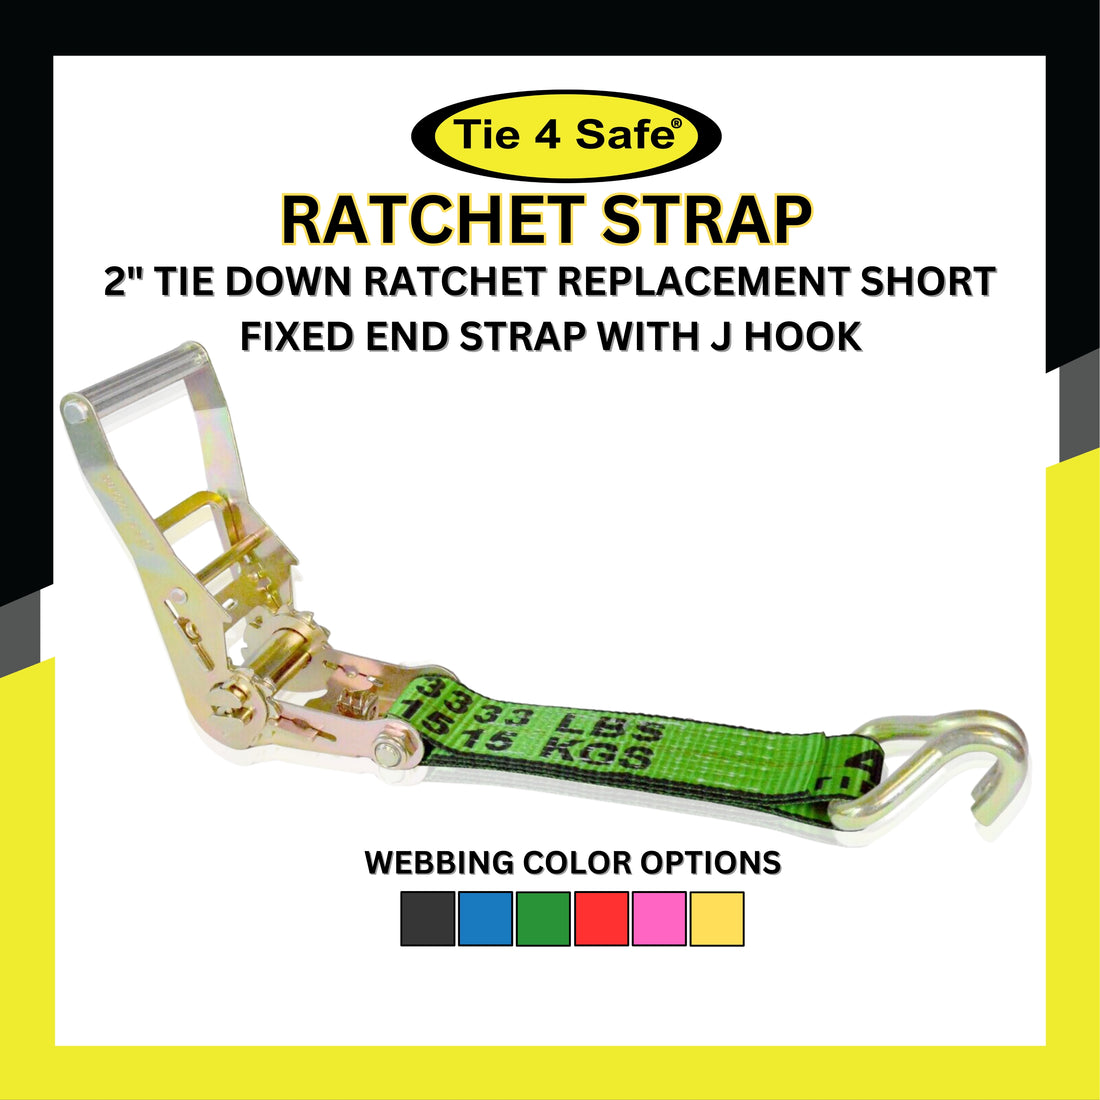 USA 2" Tie Down Ratchet Replacement Short Fixed End Strap With J Hook